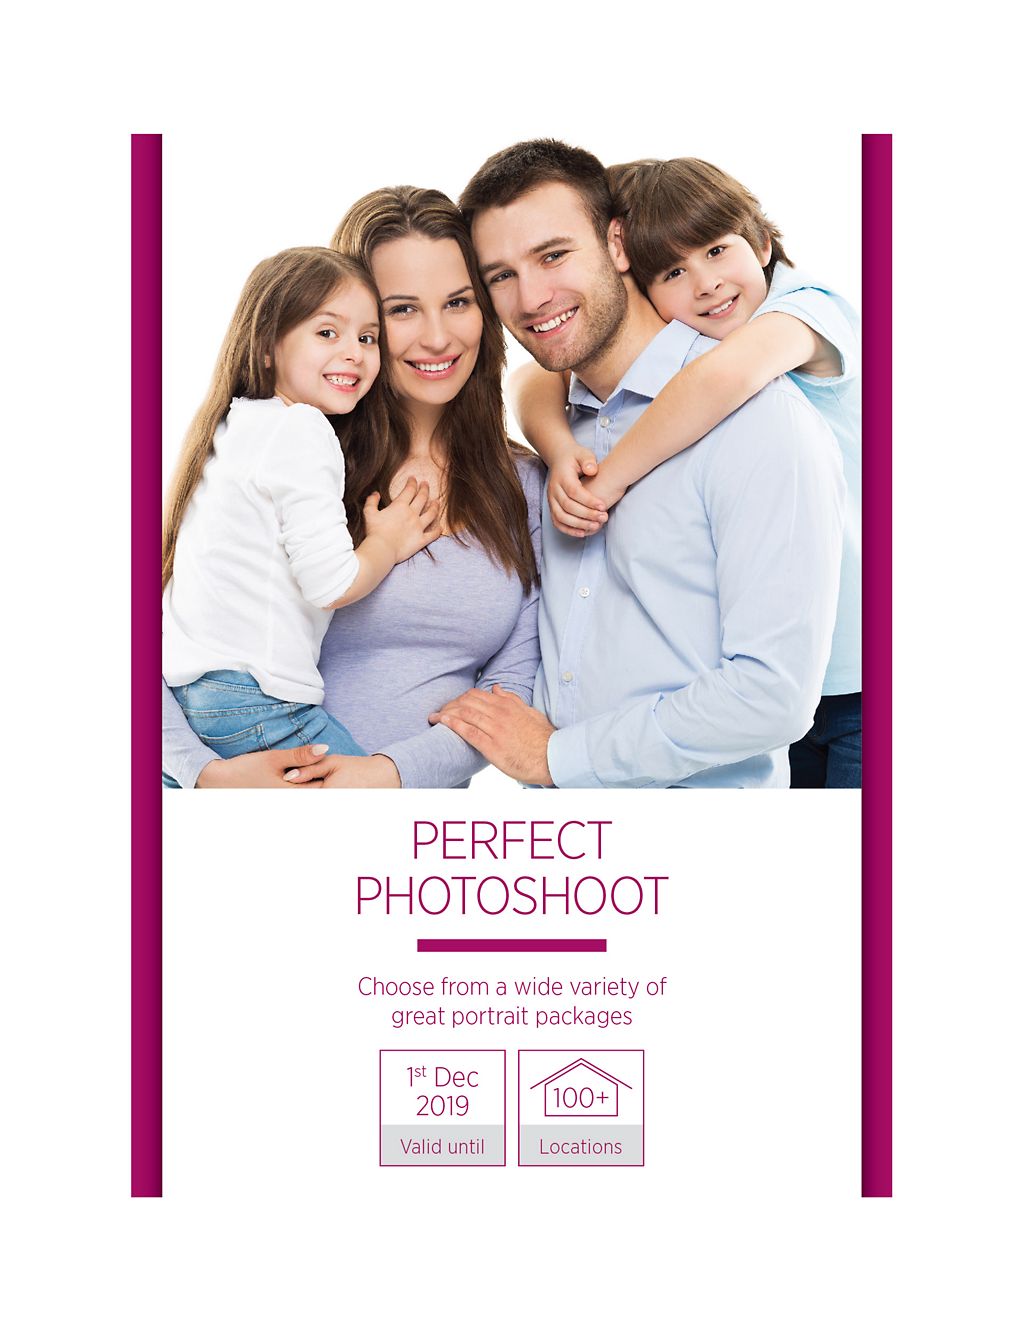 Perfect Photoshoot - Gift Experience Voucher 3 of 7